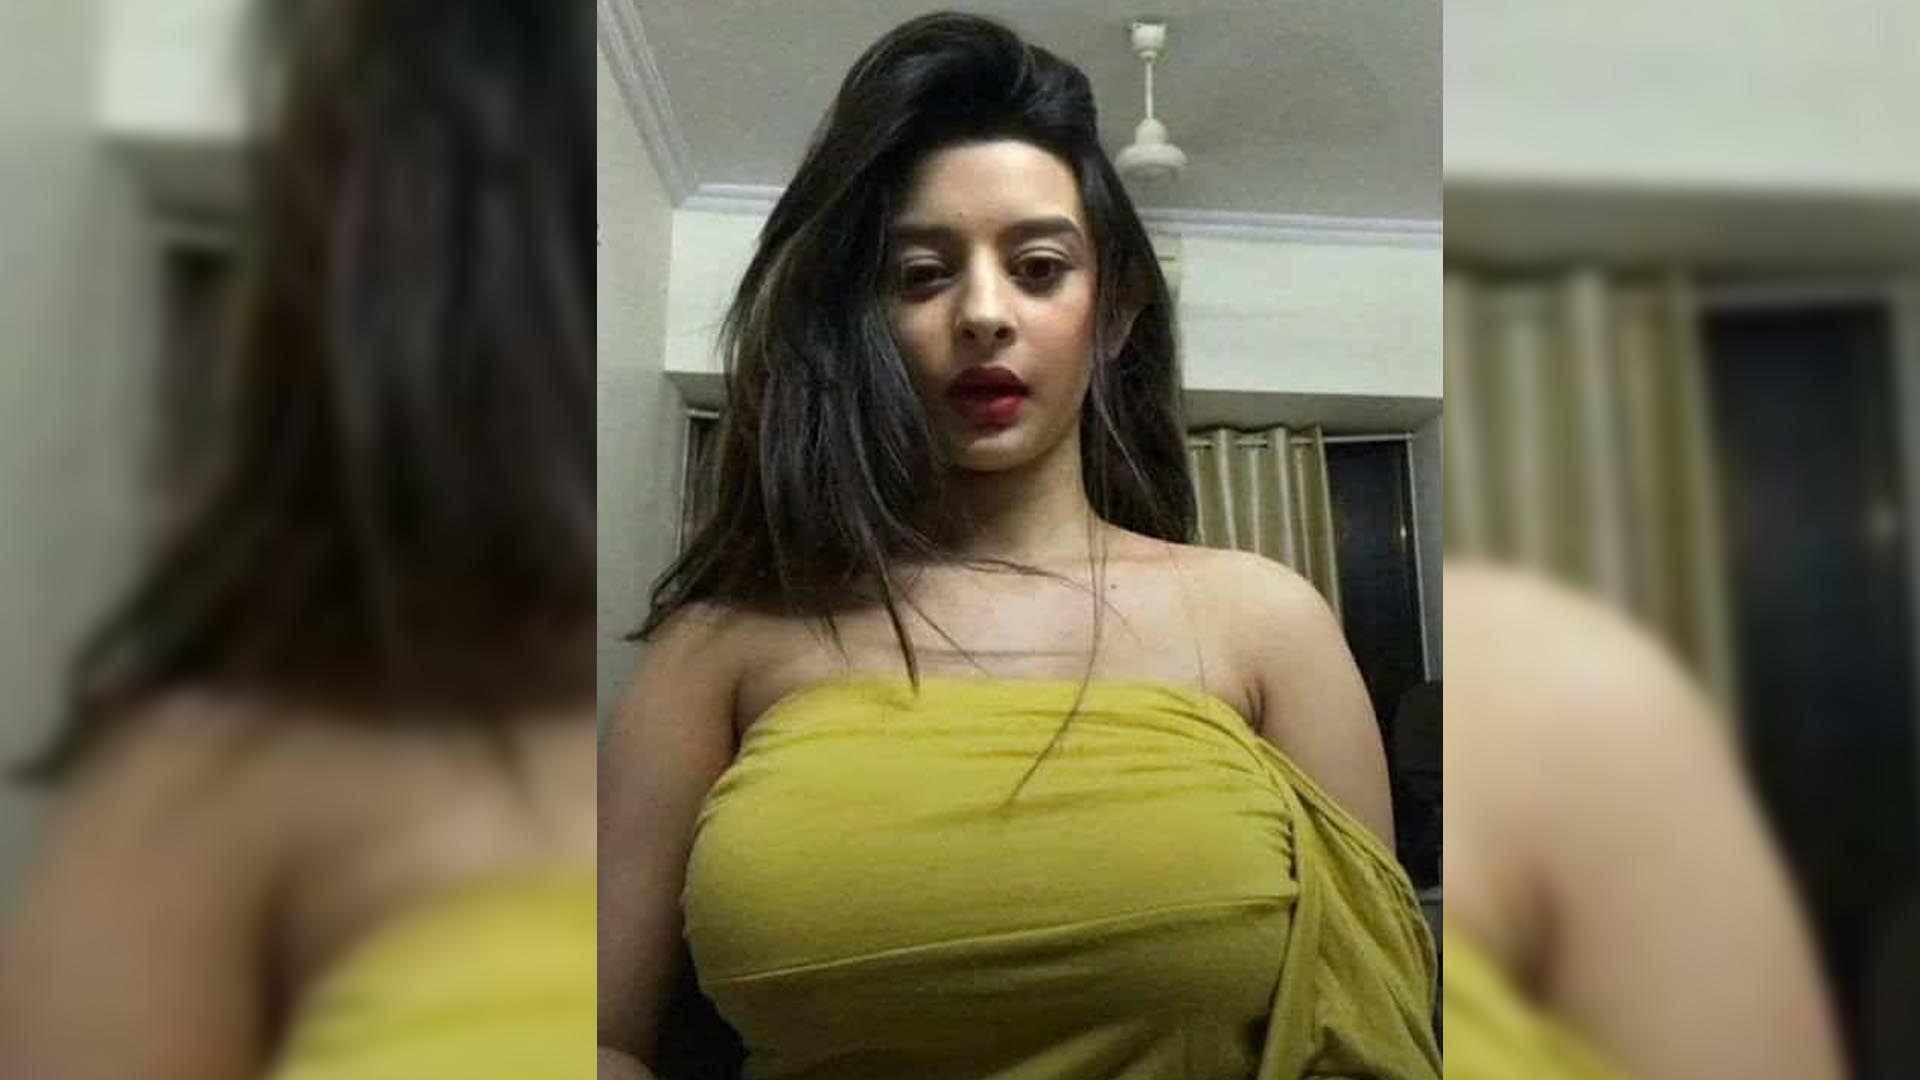 Ankita Dave Sex Tape - How has Ankita Dave become the most controversial and hottest Influencer on  Instagram? - Daily Research Plot